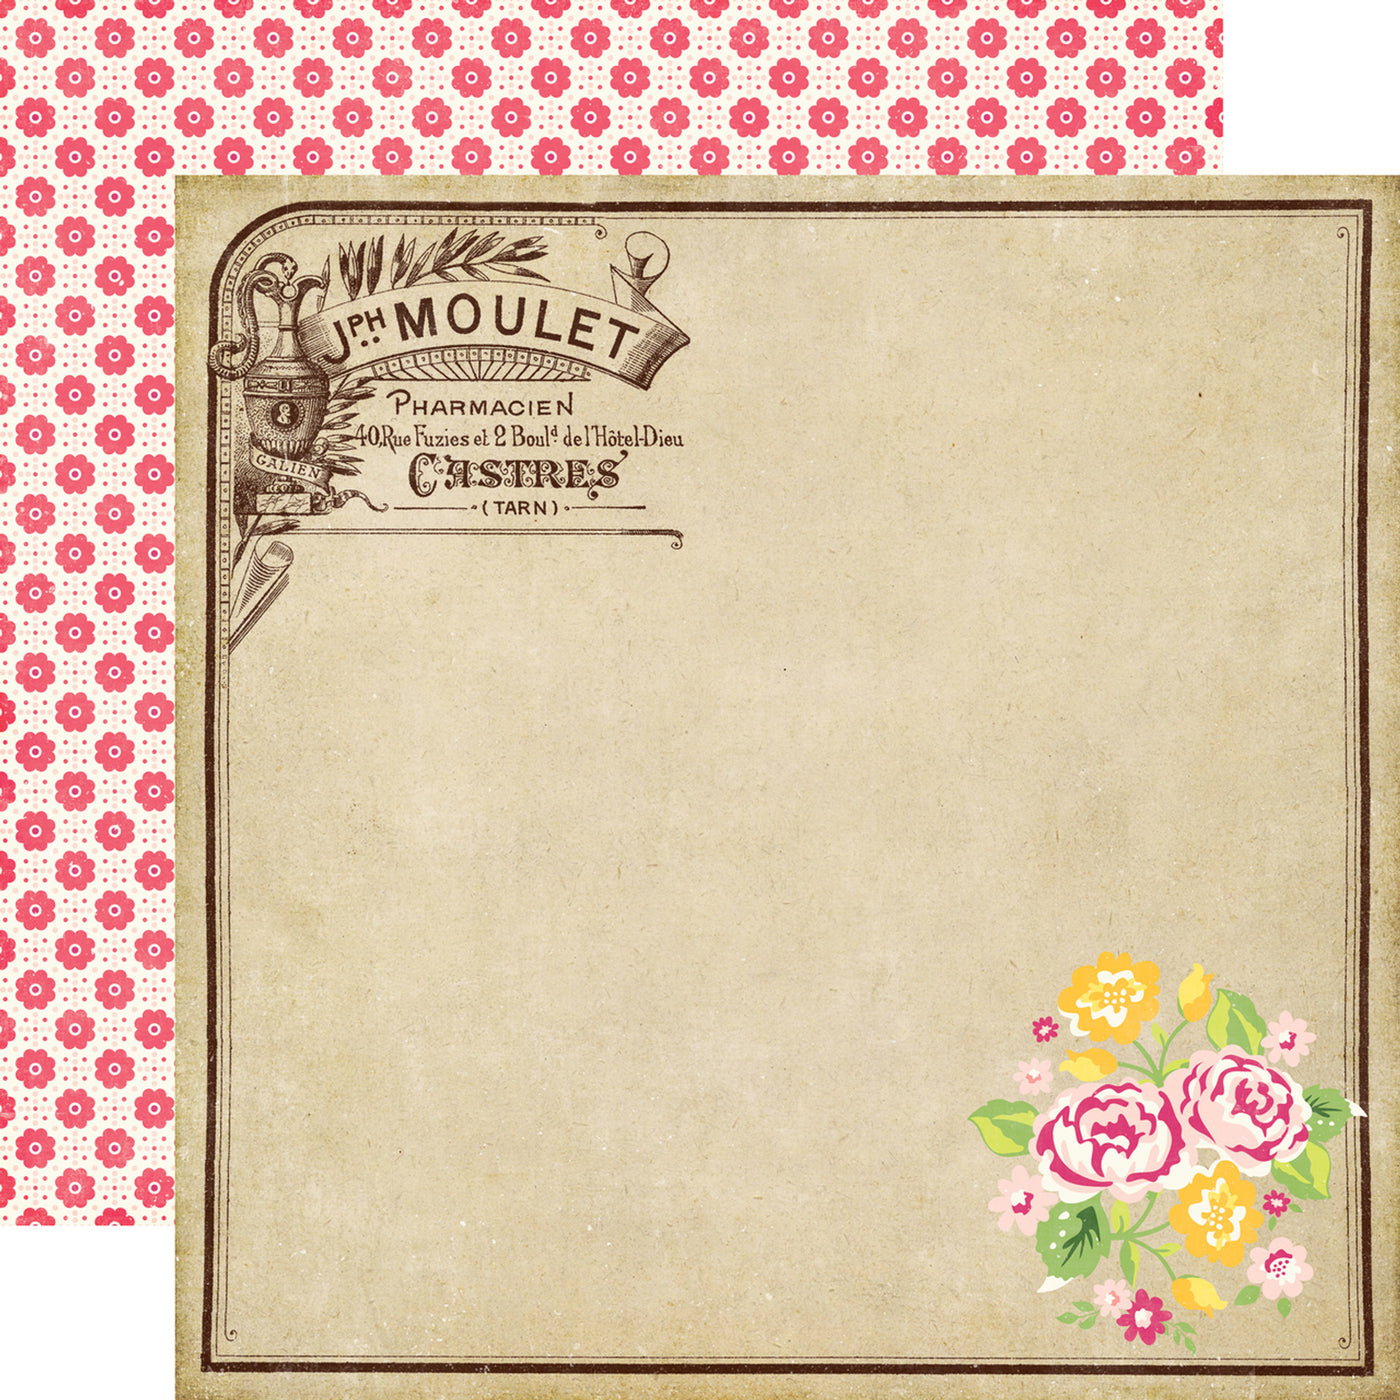 12x12 double-sided patterned paper - (fancy French label in the top left corner, pink end yellow flowers in the bottom right corner on a kraft background with rows of pink daisies and polka dots on an off-white background reverse) - Echo Park Paper.